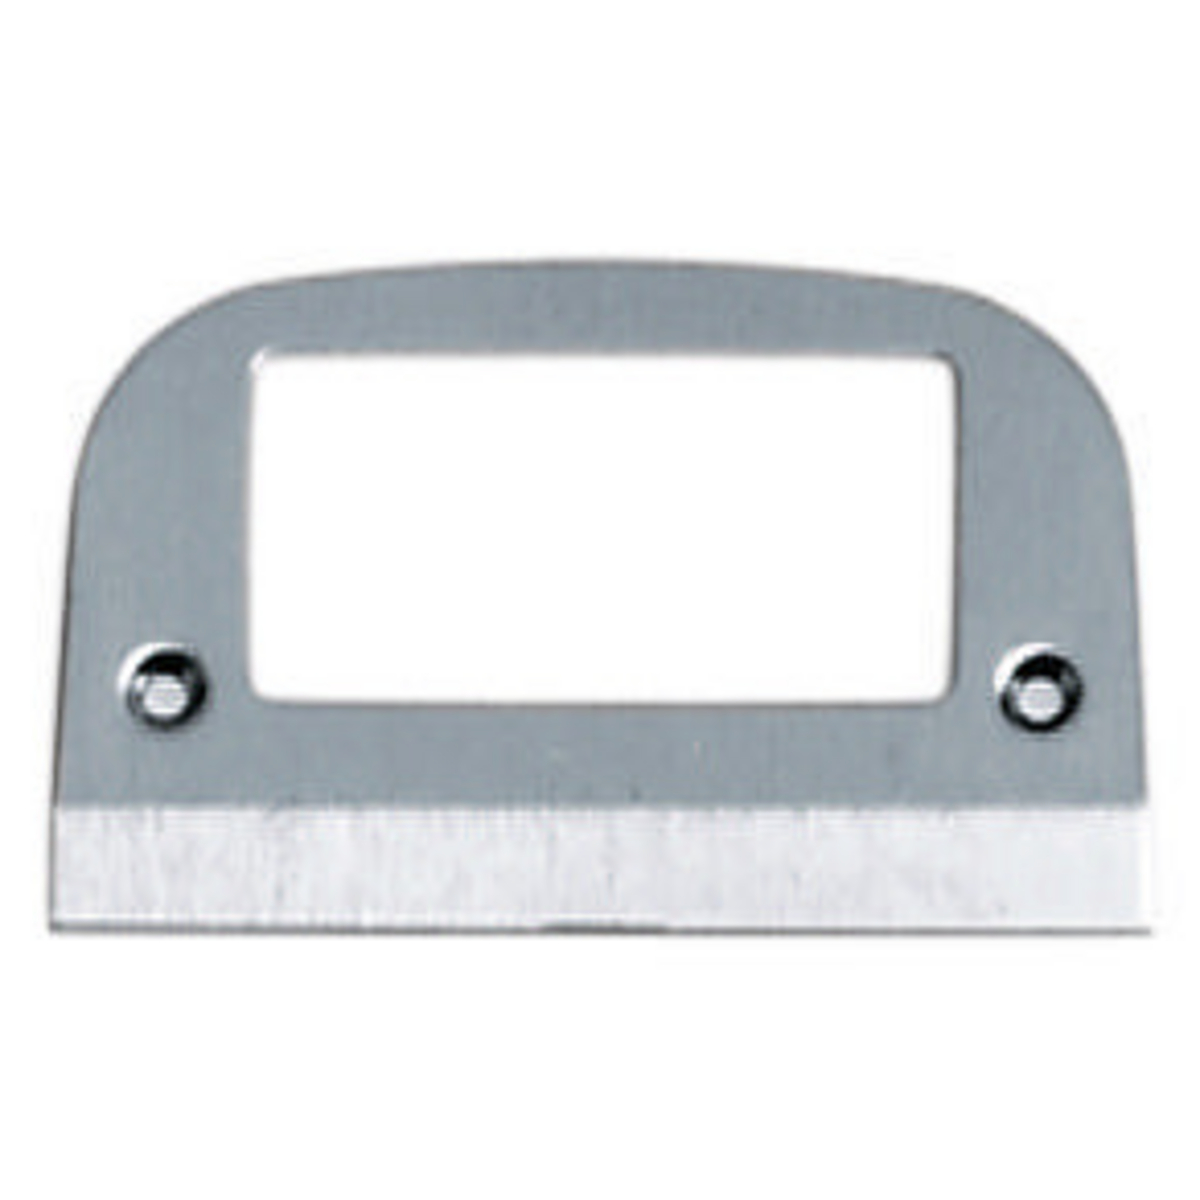 Hubbell SS-309-S Lo-Con Feed Plate Aluminum 